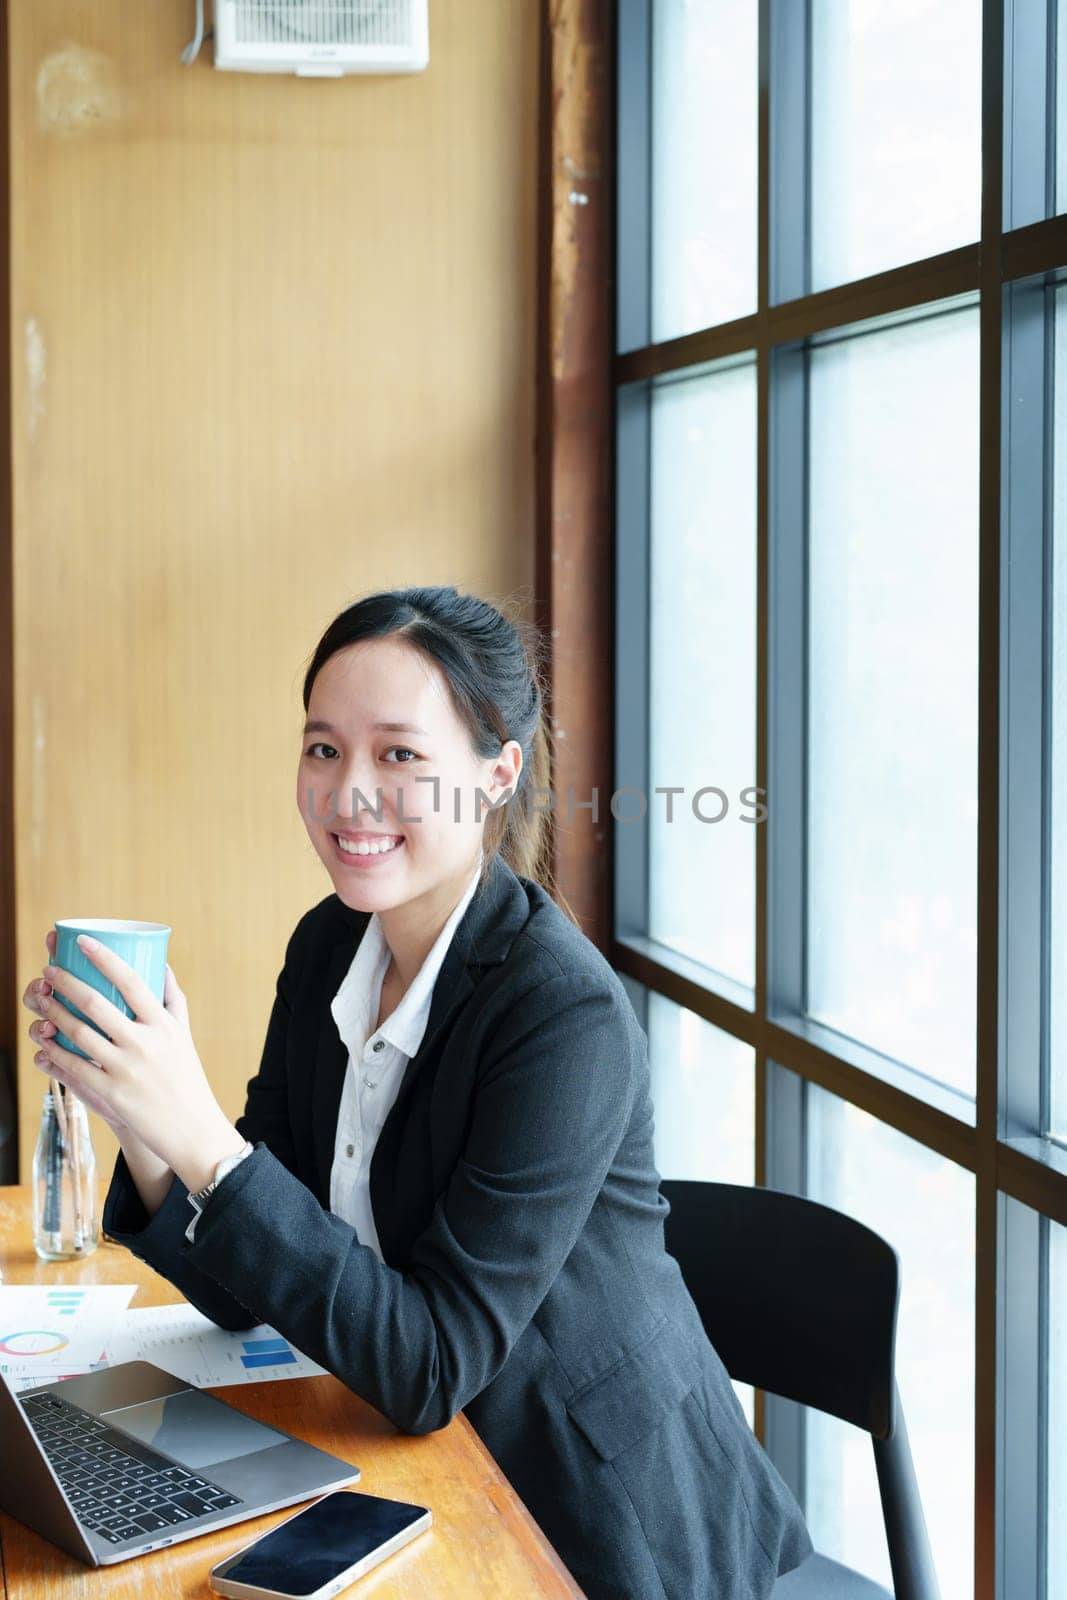 Portrait of a young woman drinking coffee while using a computer by Manastrong